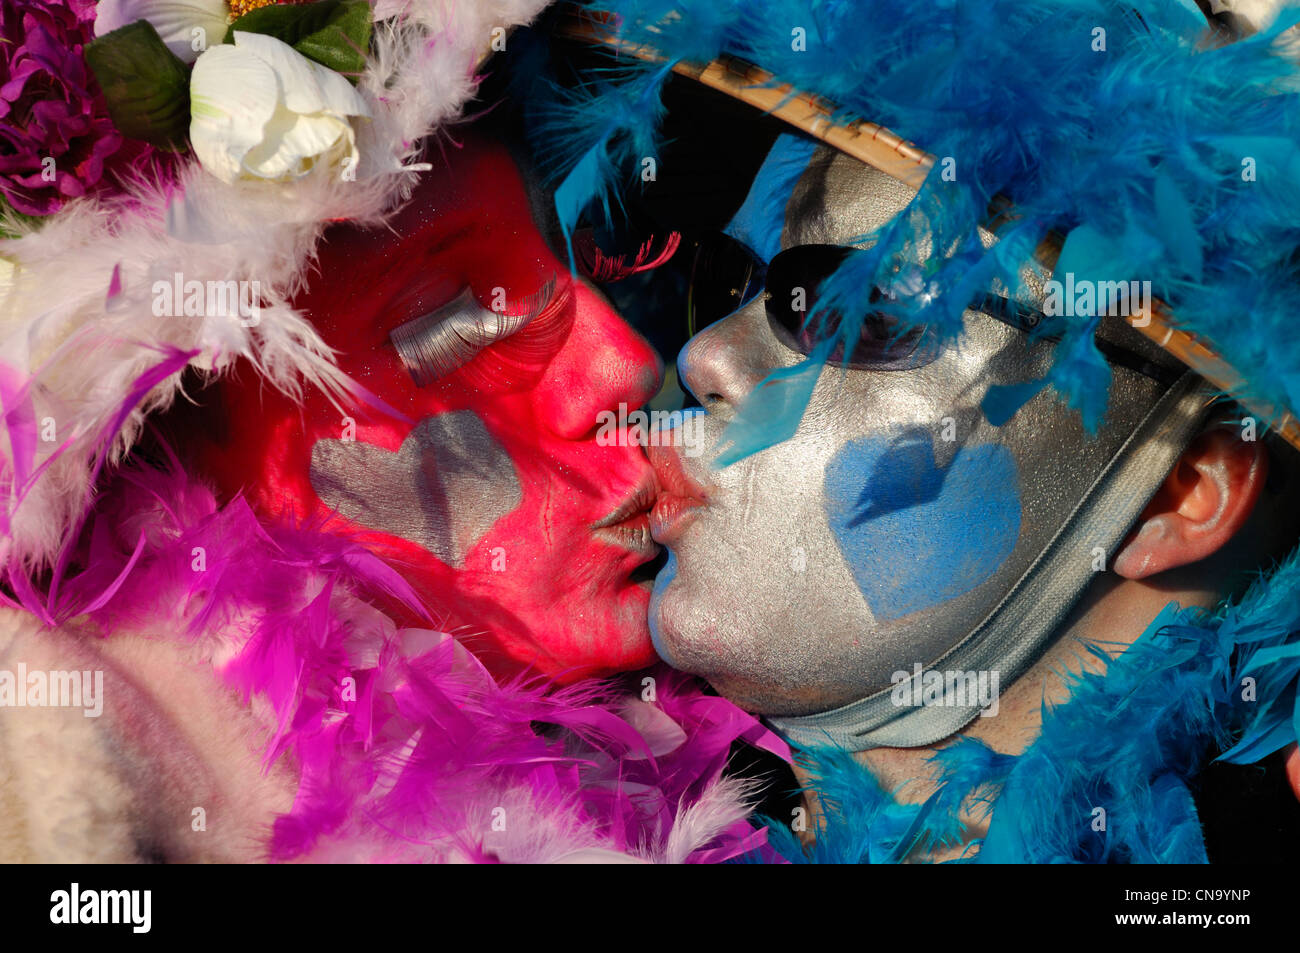 France, Nord, Dunkirk, carnival of Dunkirk, two carnival goers kissing with colorful disguises Stock Photo